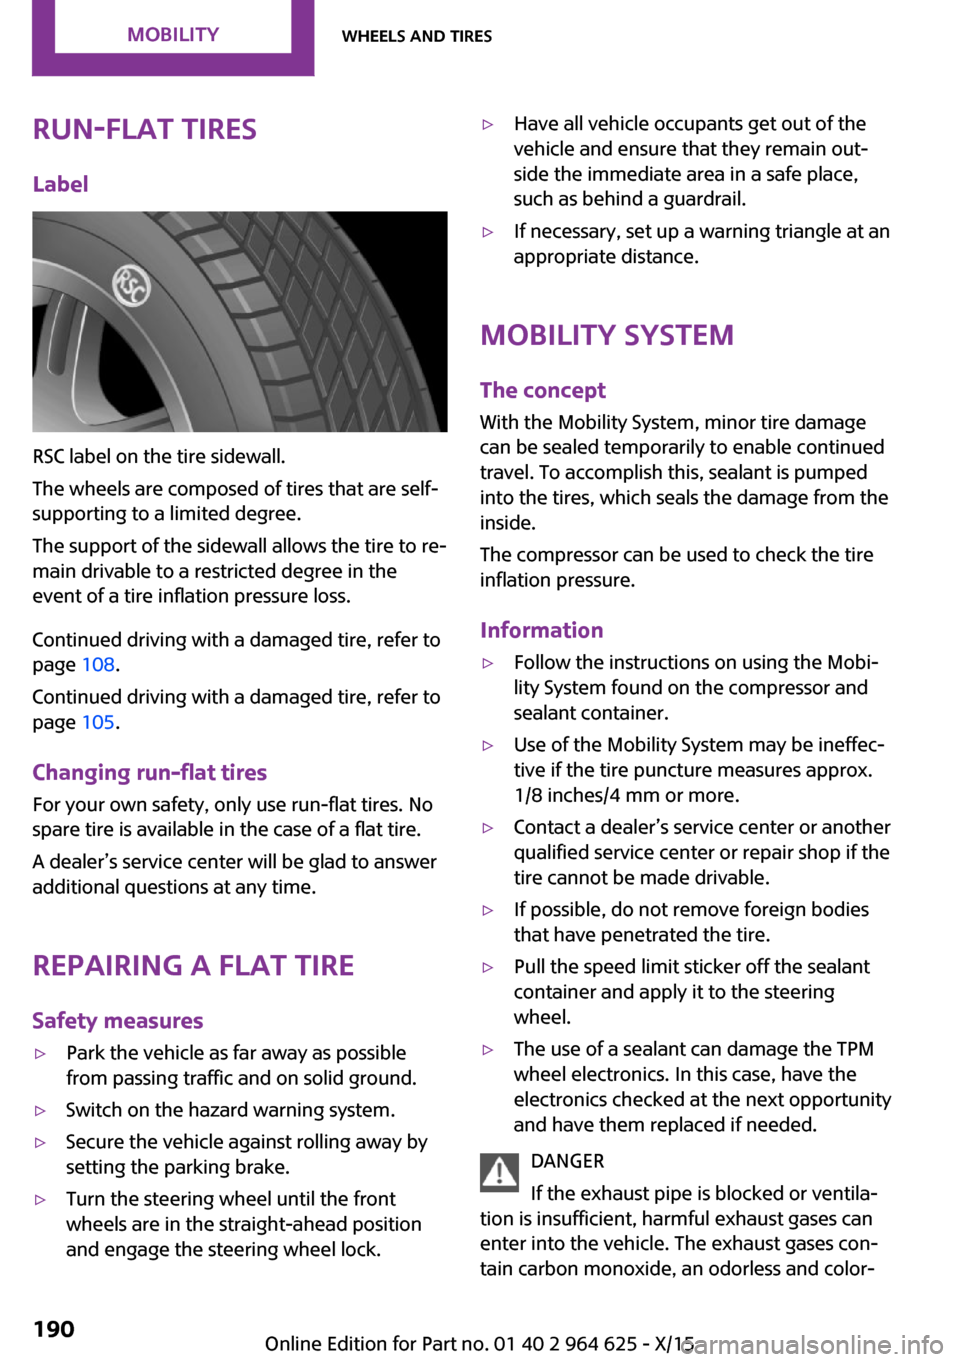 MINI 3 door 2015  Owners Manual Run-flat tiresLabel
RSC label on the tire sidewall.
The wheels are composed of tires that are self-
supporting to a limited degree.
The support of the sidewall allows the tire to re‐
main drivable t